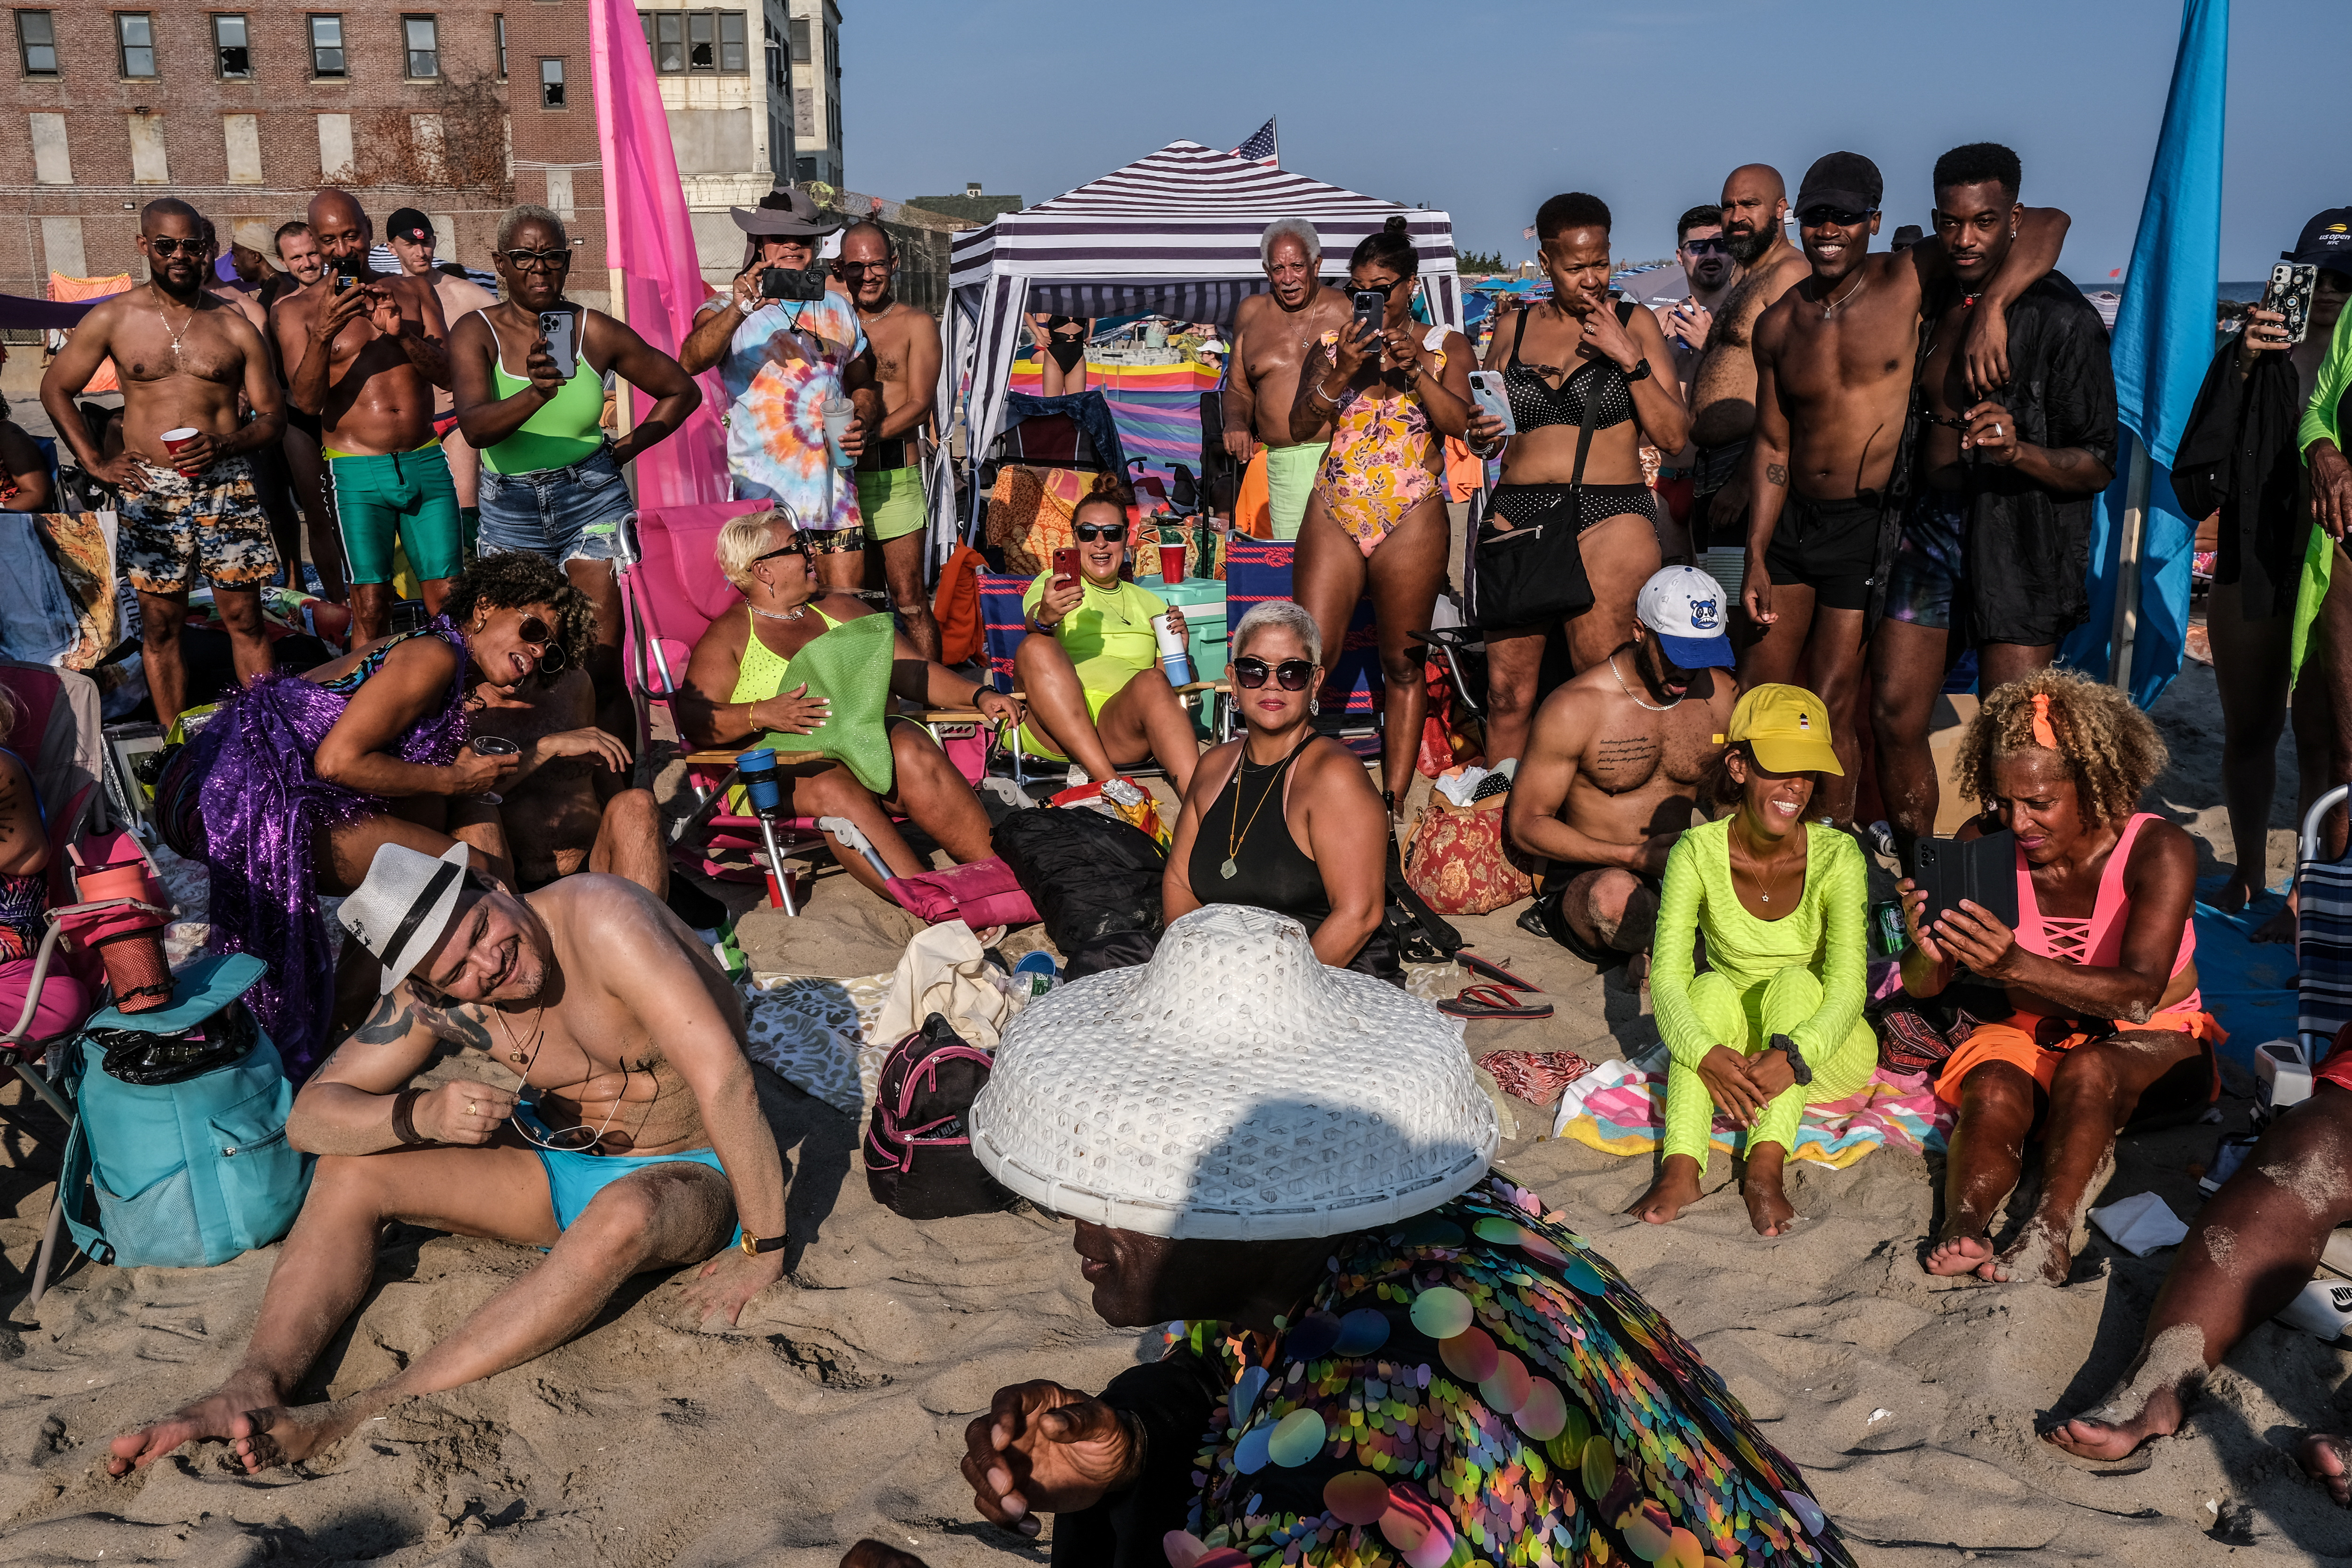 Beach-side building's demolition means change for New York LGBTQ community